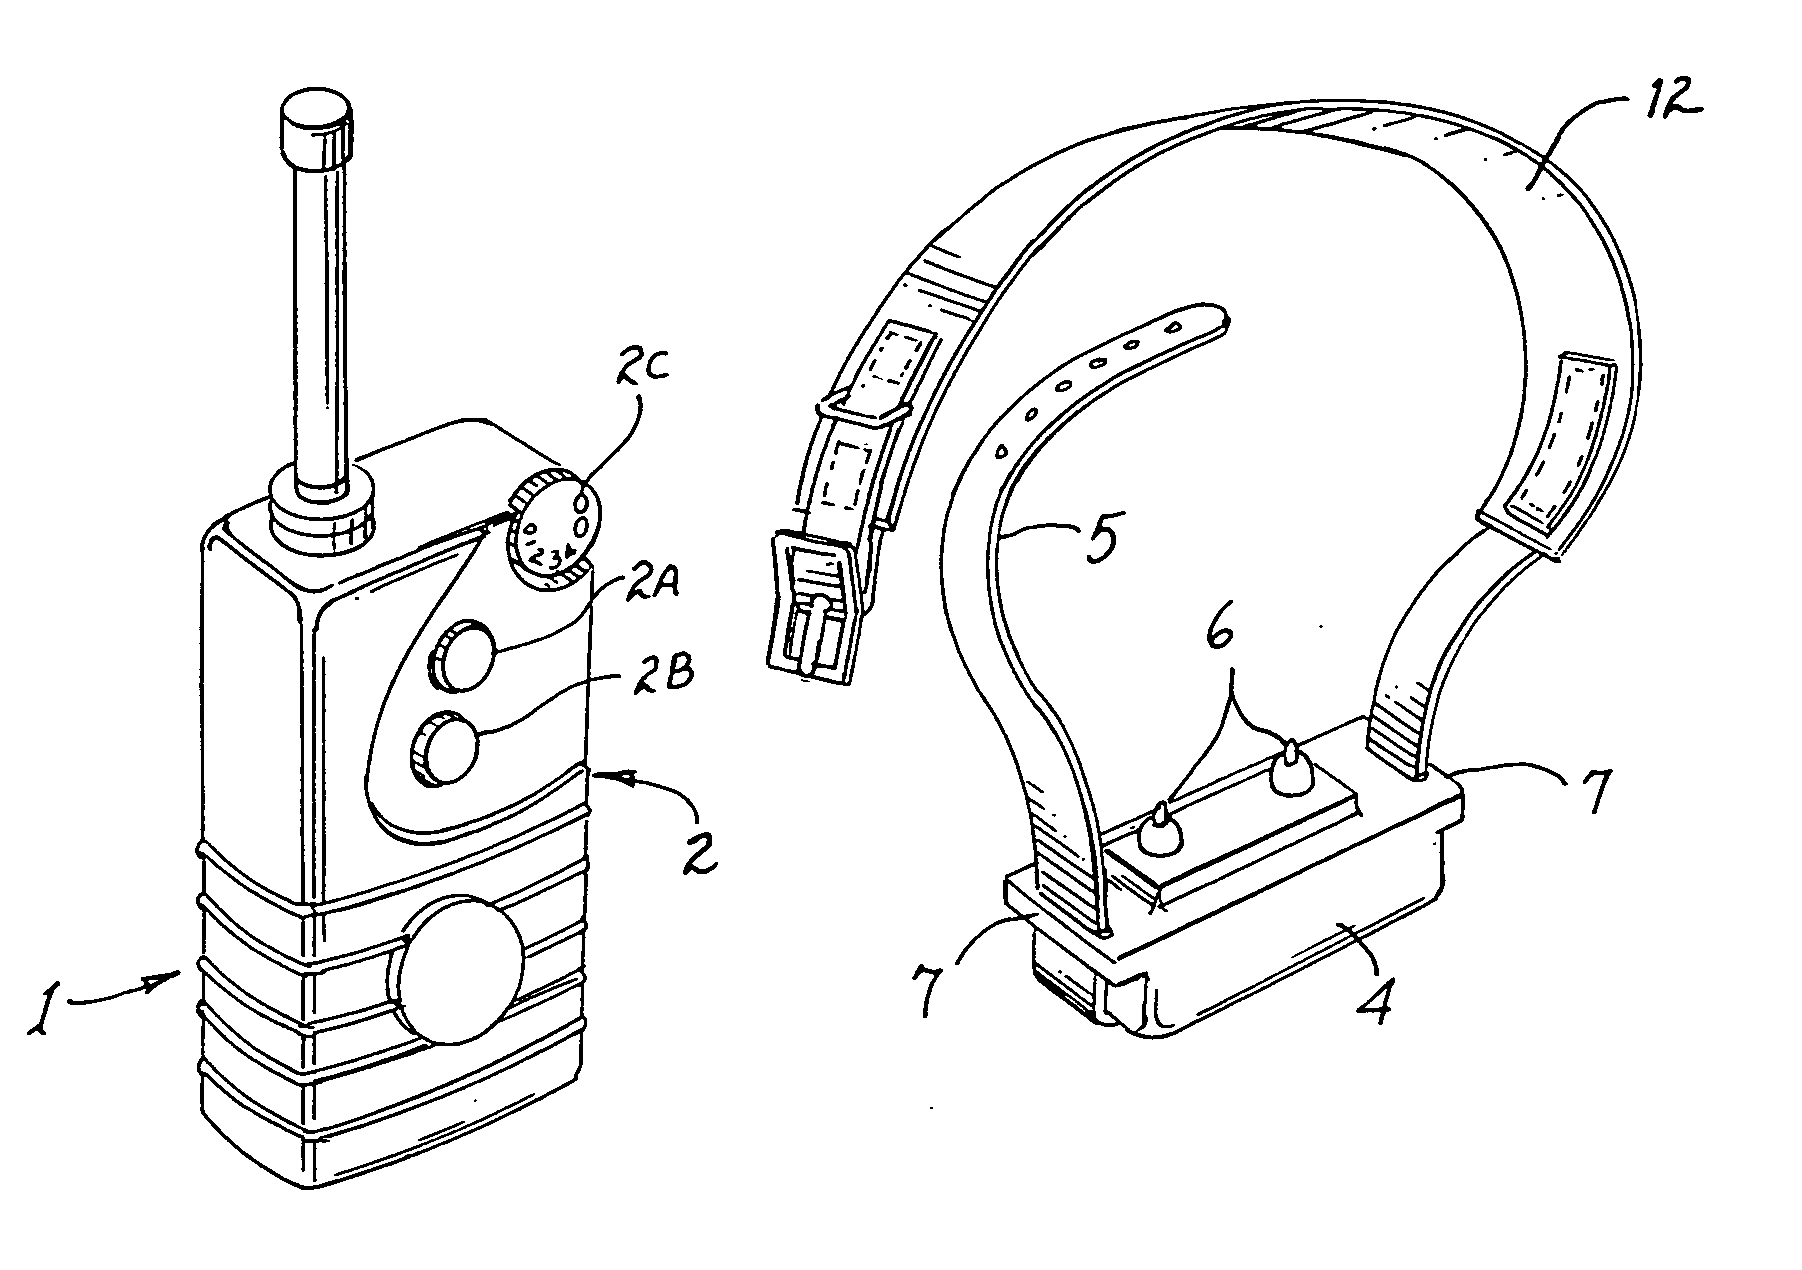 Electronic animal training device support system